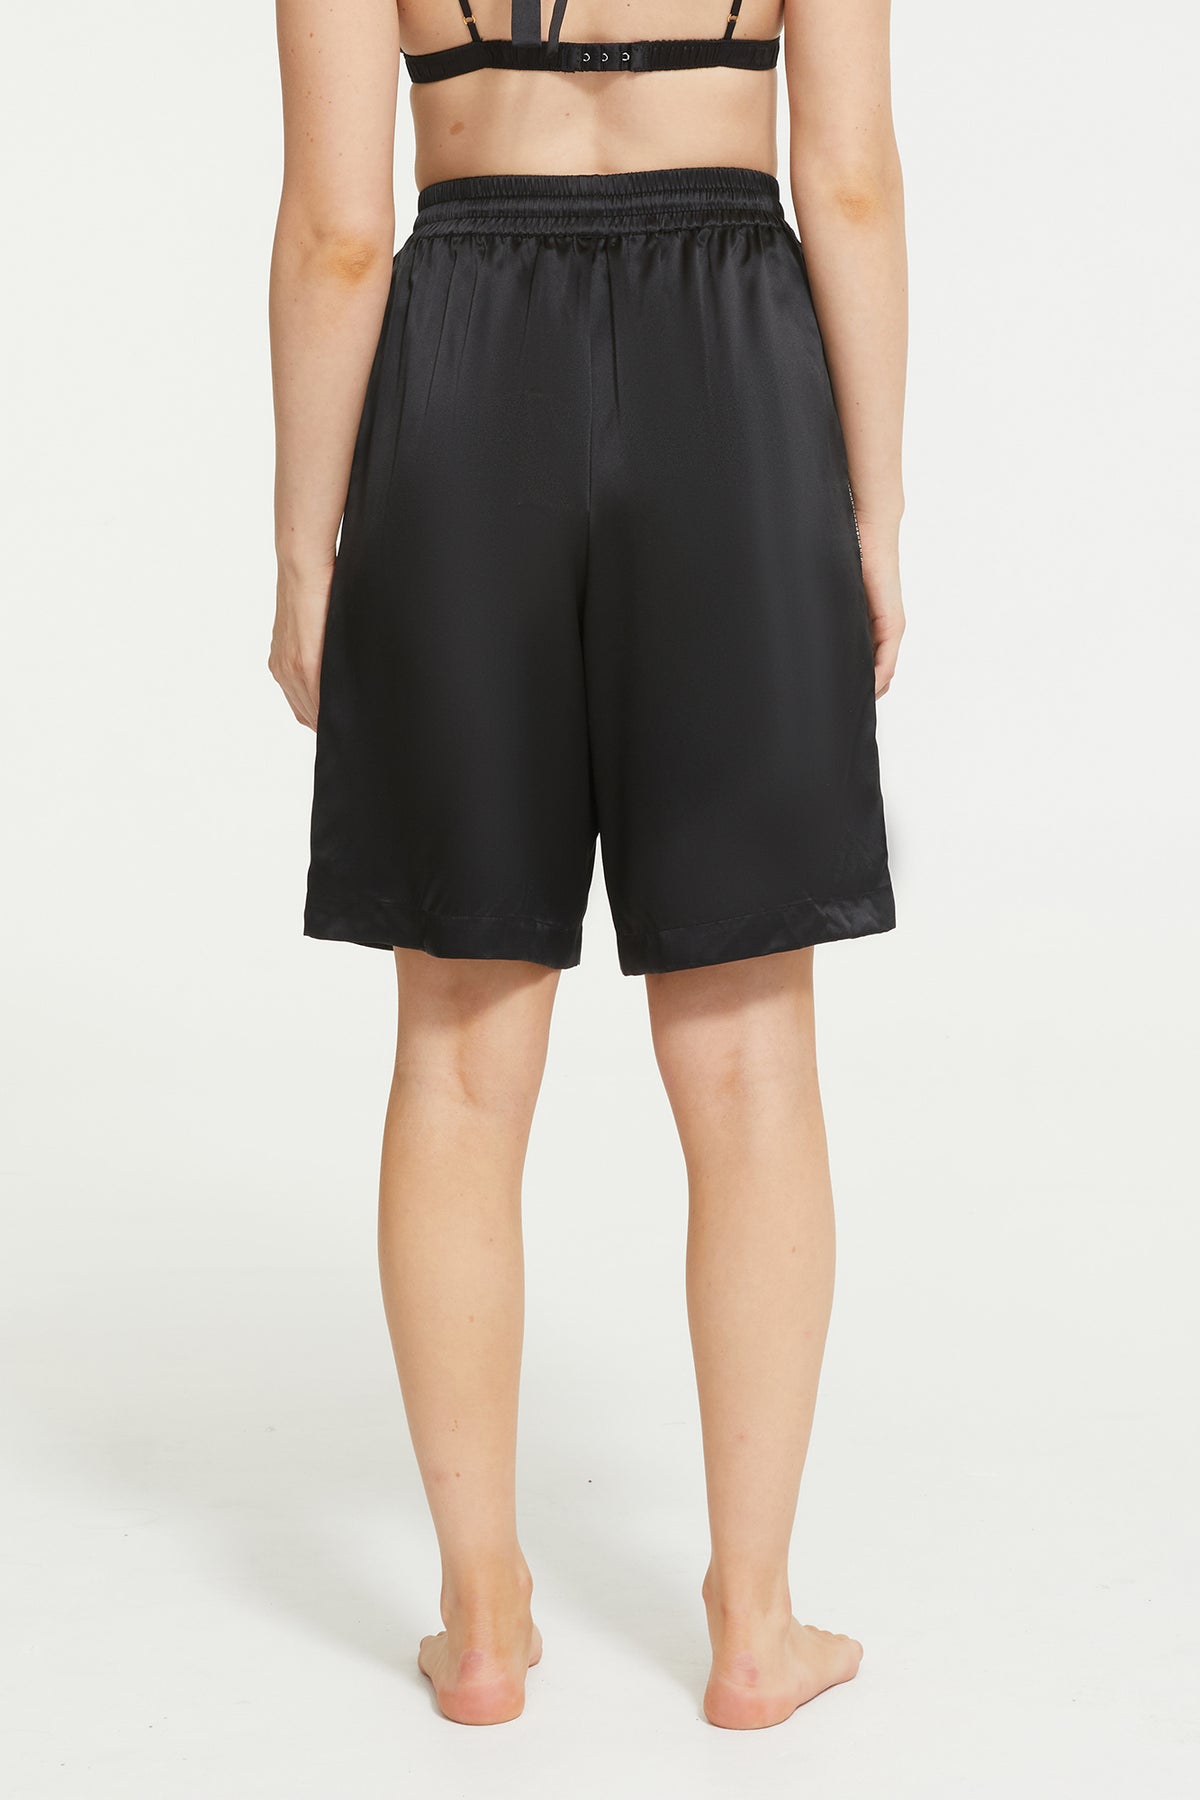 The Tom Boy Short in Black by Ginia